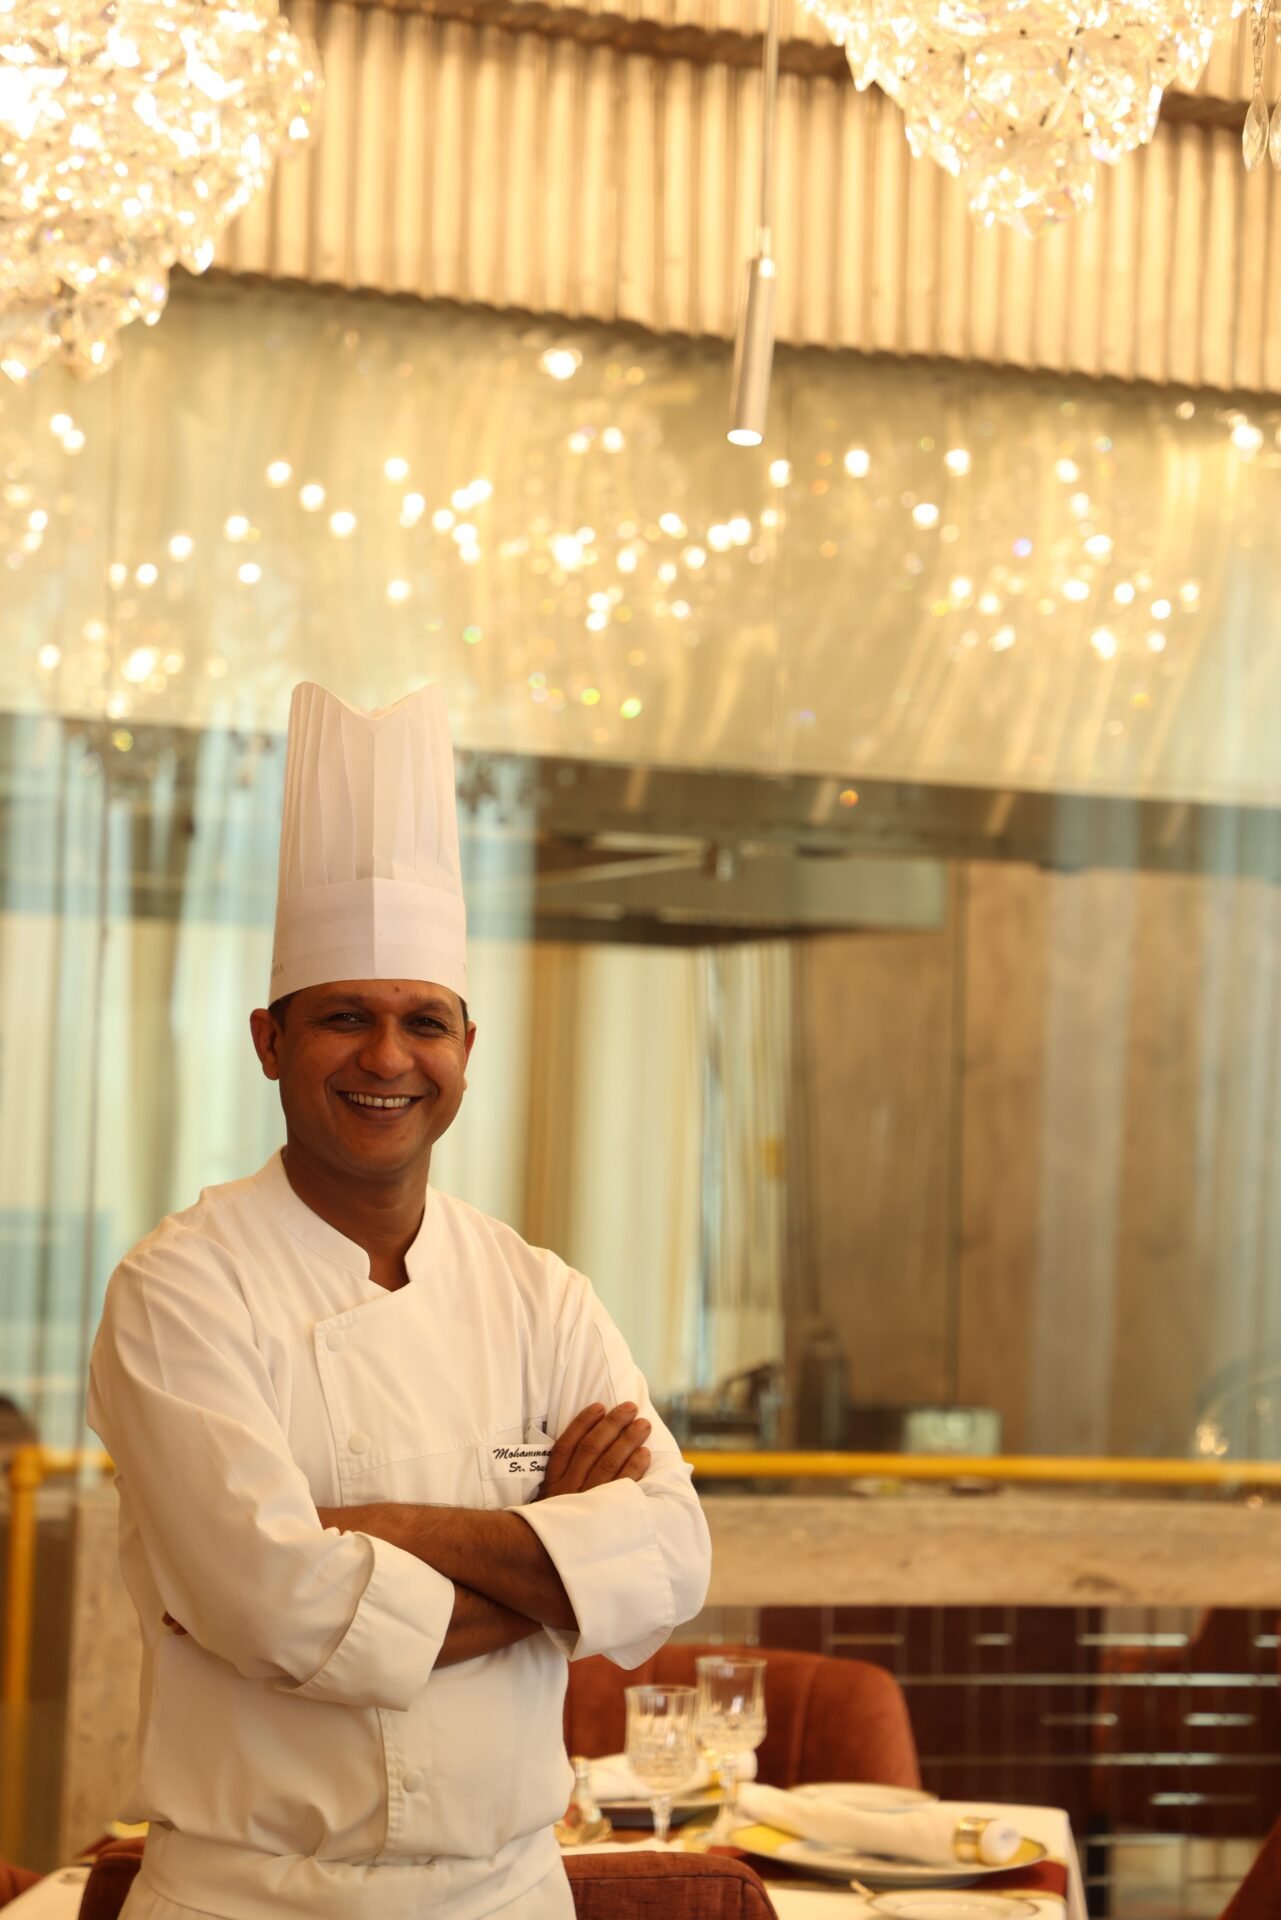 You are currently viewing Two ‘Food’ilicious kebab recipes from Sous Chef Javed Mohammad from The Leela Gandhinagar